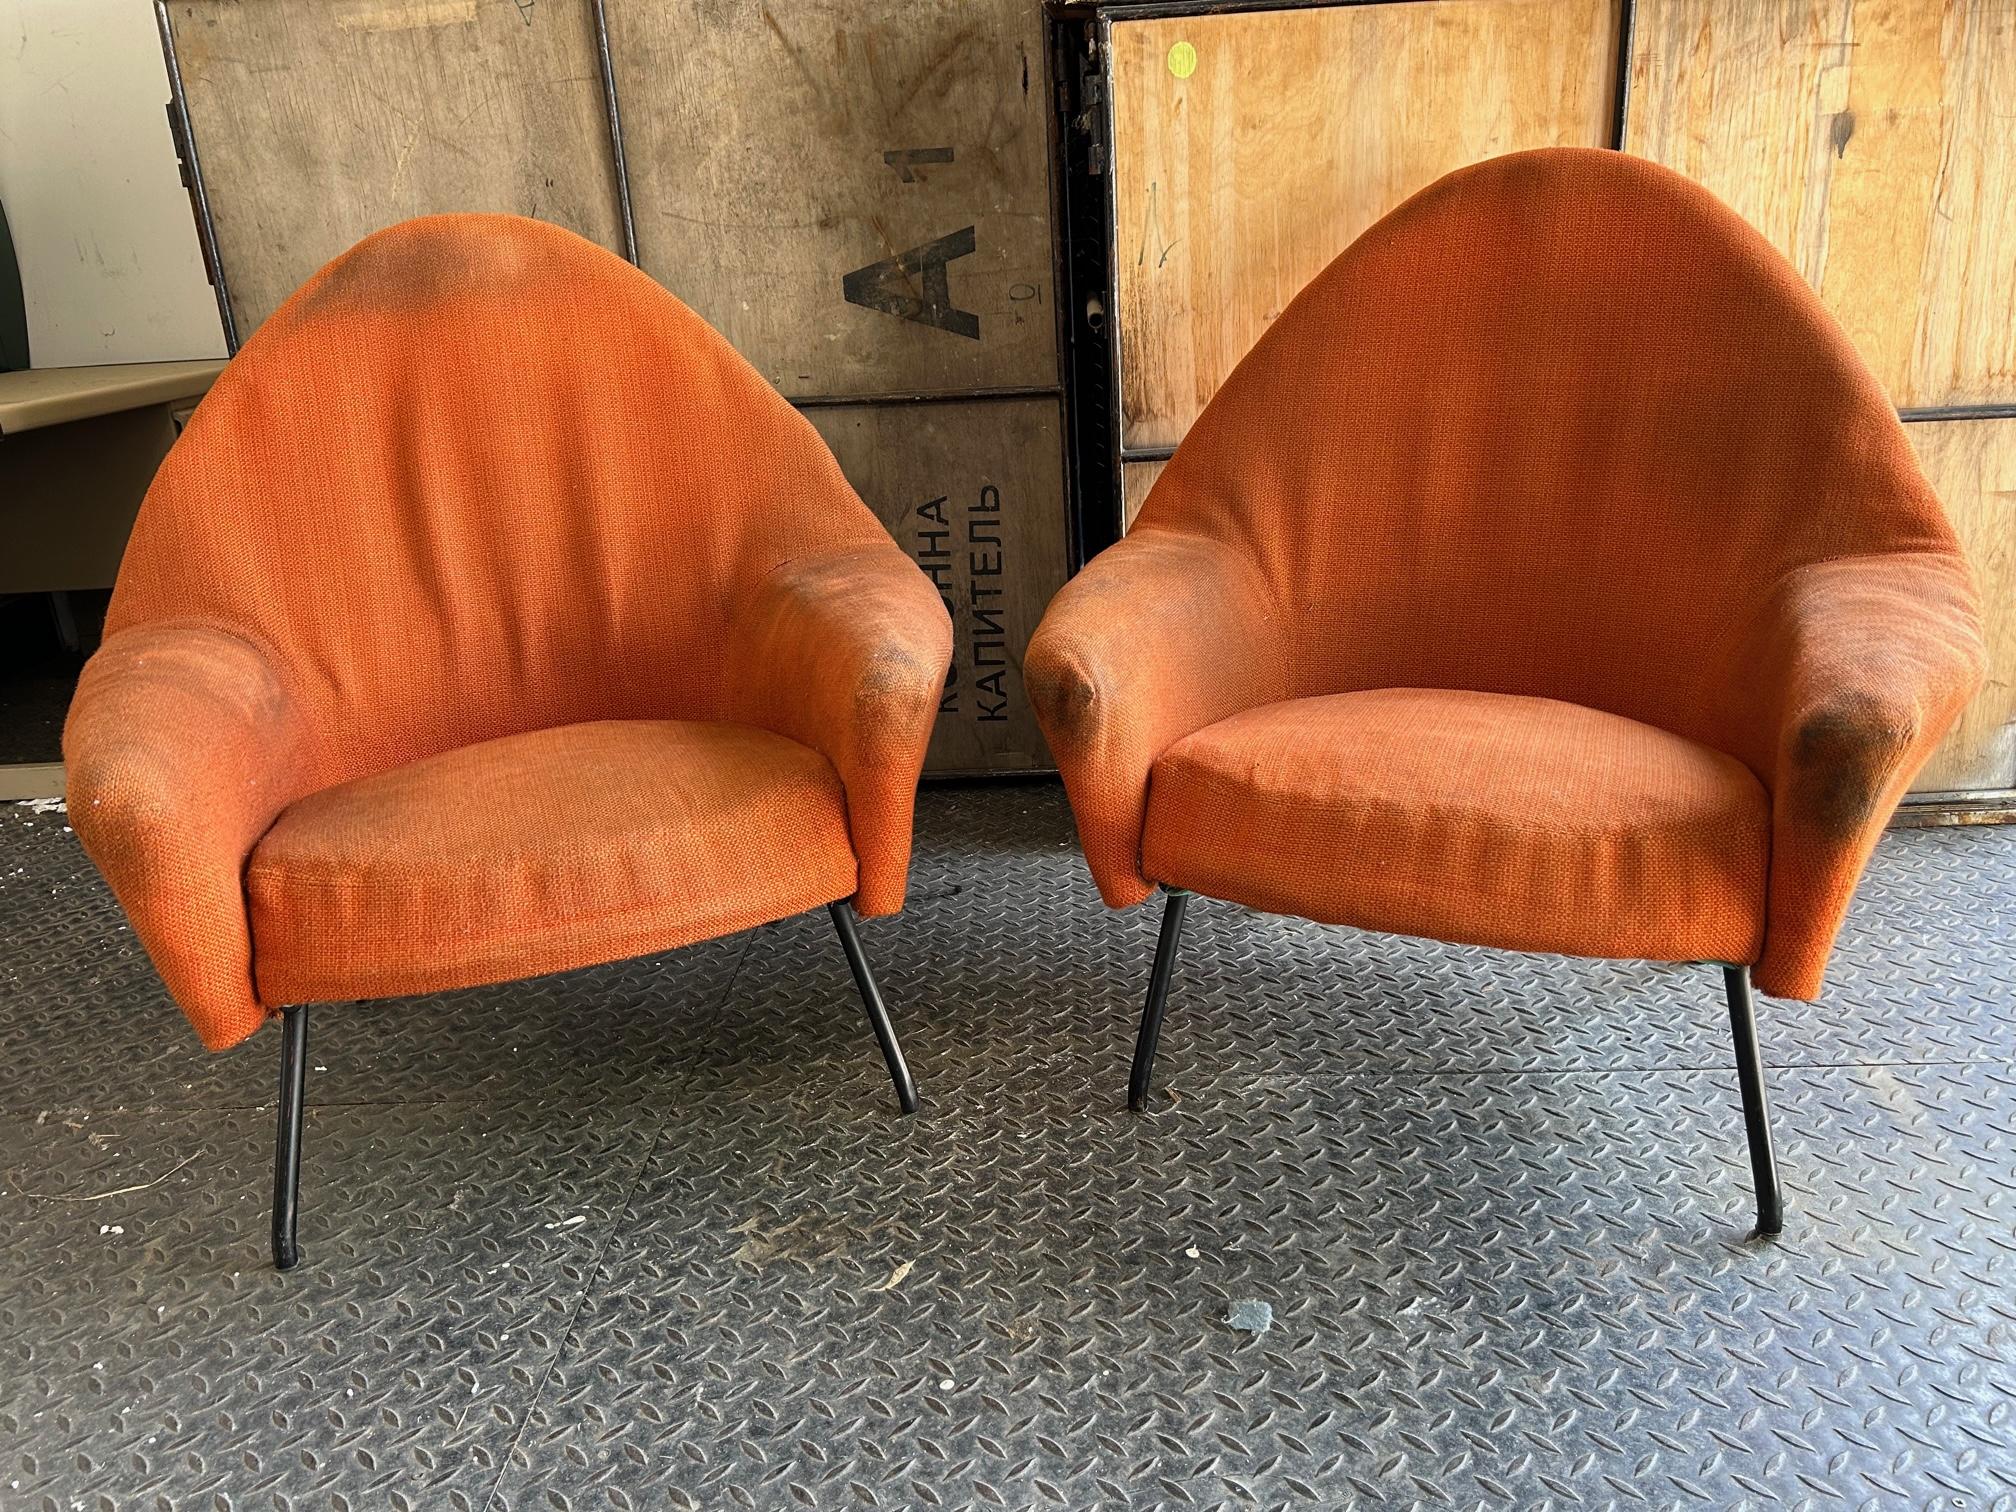 Armchairs model 770 by Joseph-André Motte for Steiner, 1958. Black metal-lacquered feet. To be reupholstered.
Matching sofa is available, but not included.